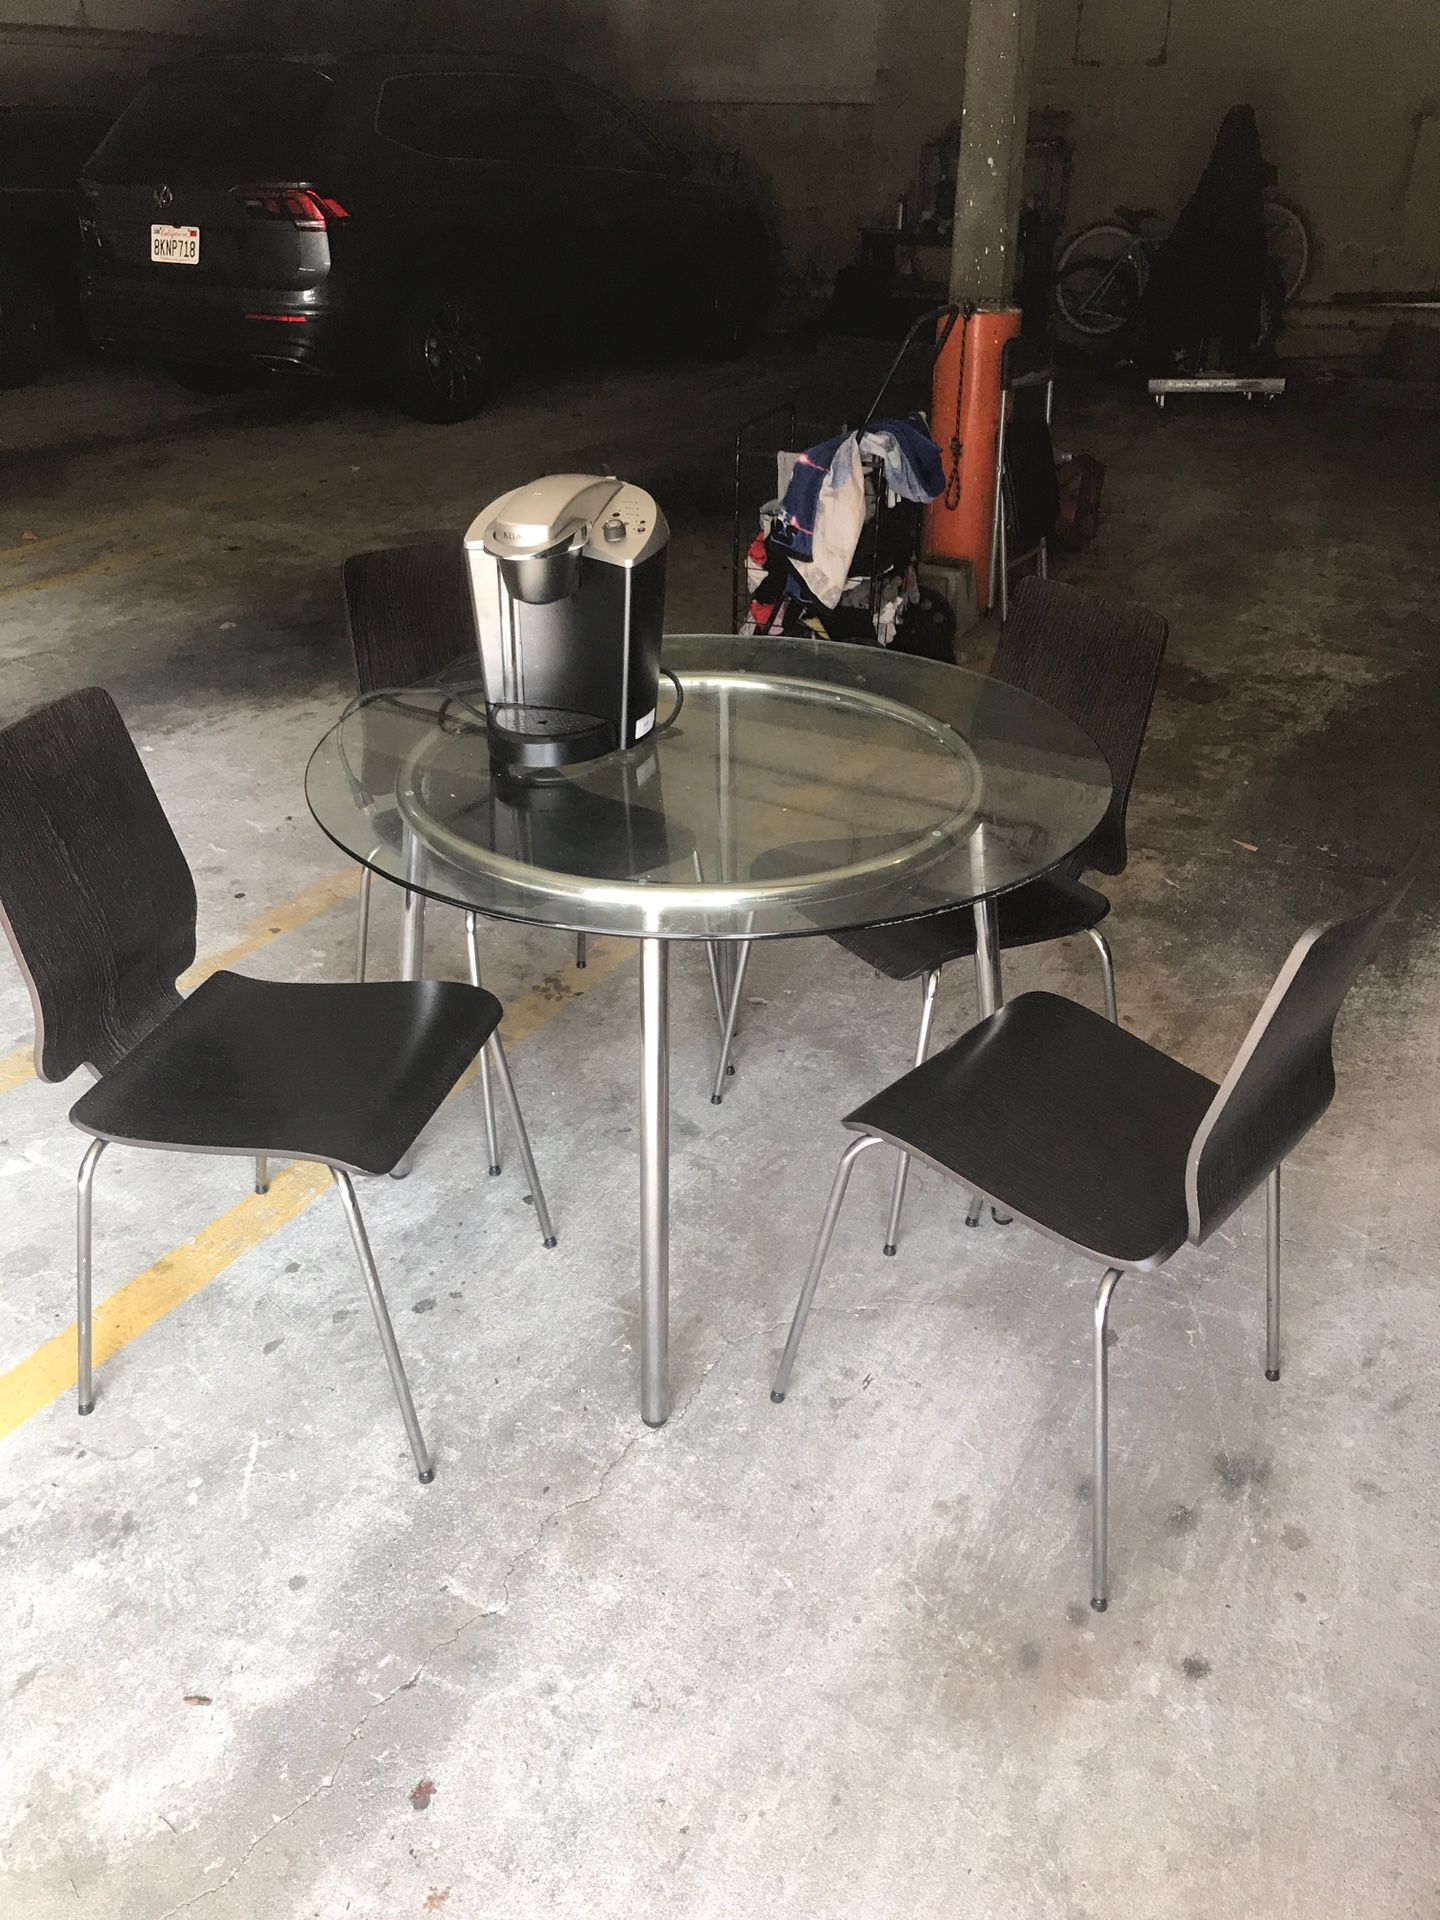 Kitchen dining table with 4 chairs